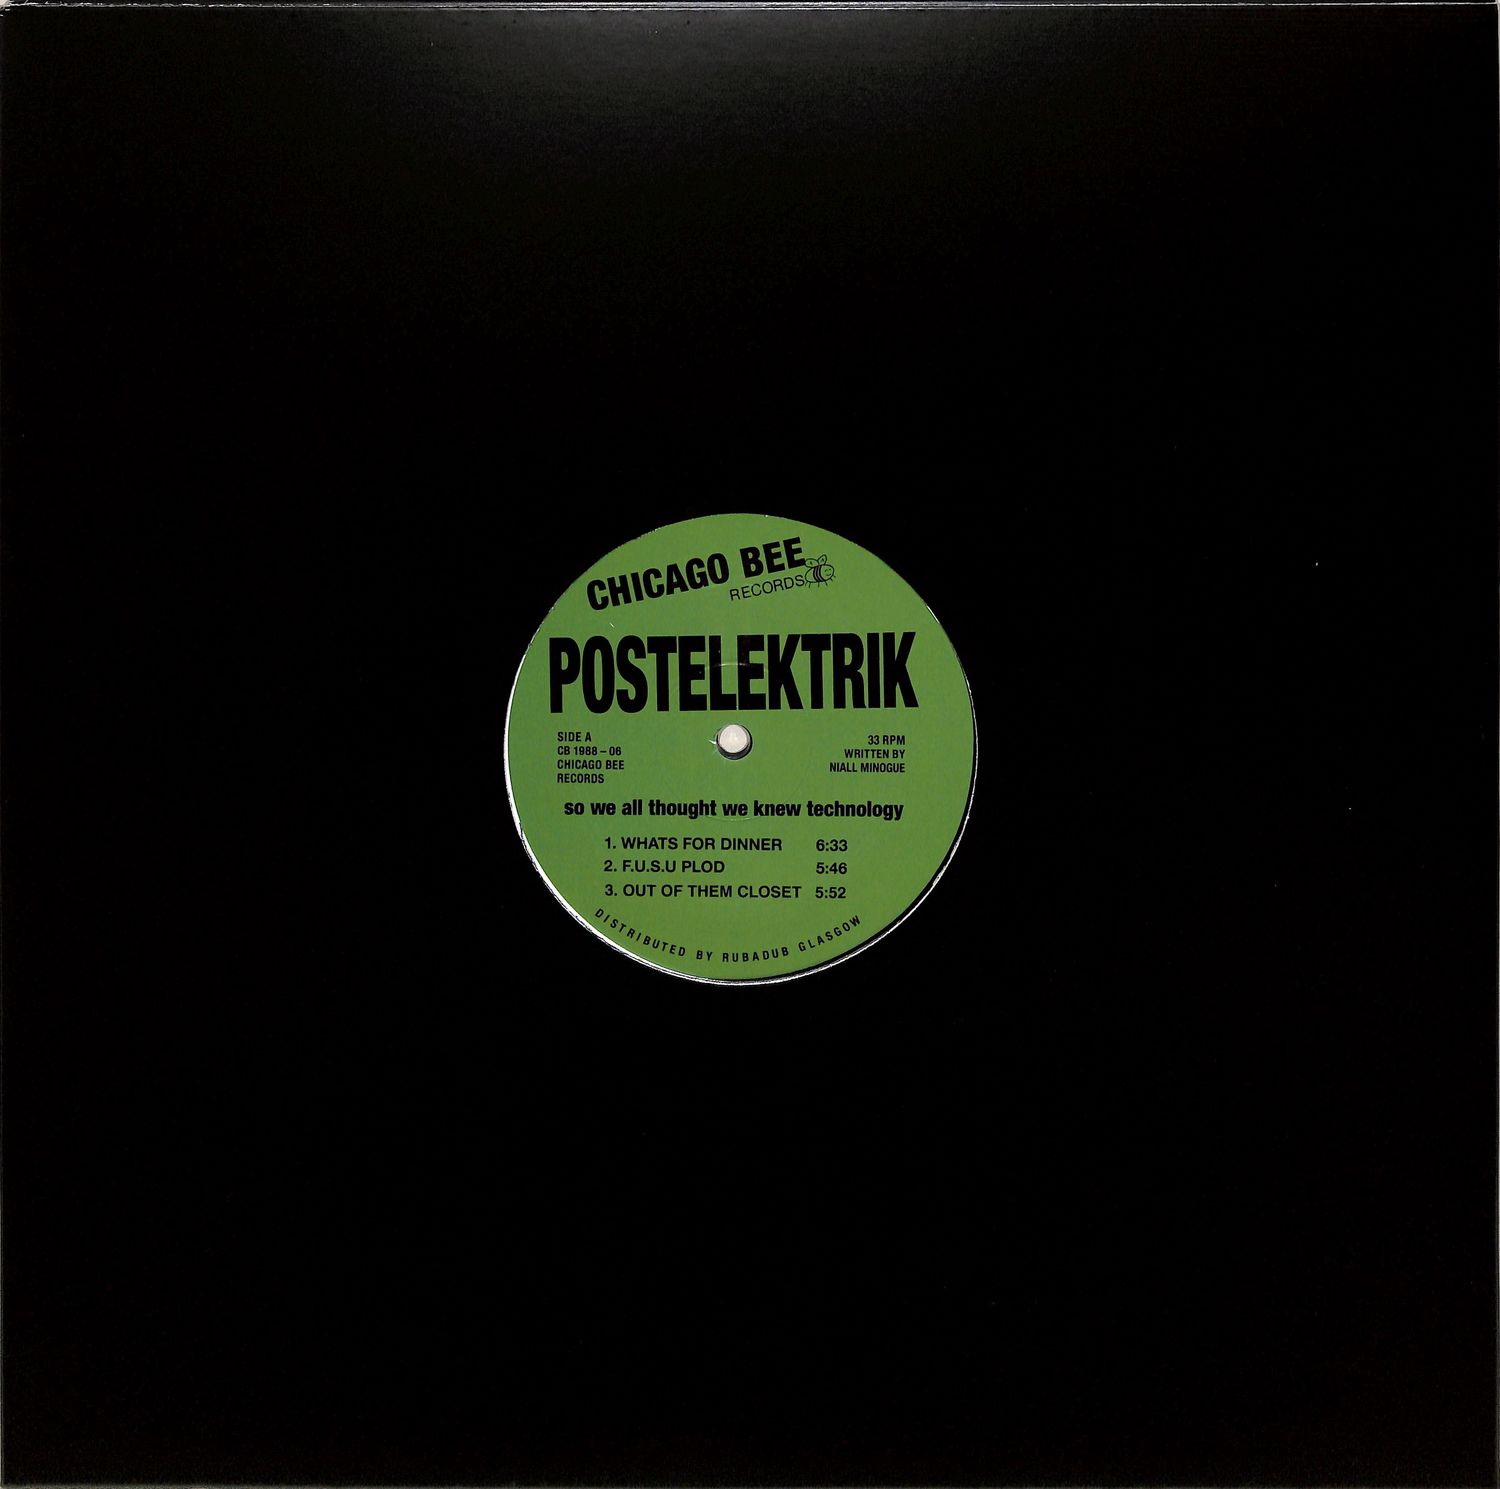 Postelektrik - SO WE ALL THOUGHT WE KNEW TECHNOLOGY